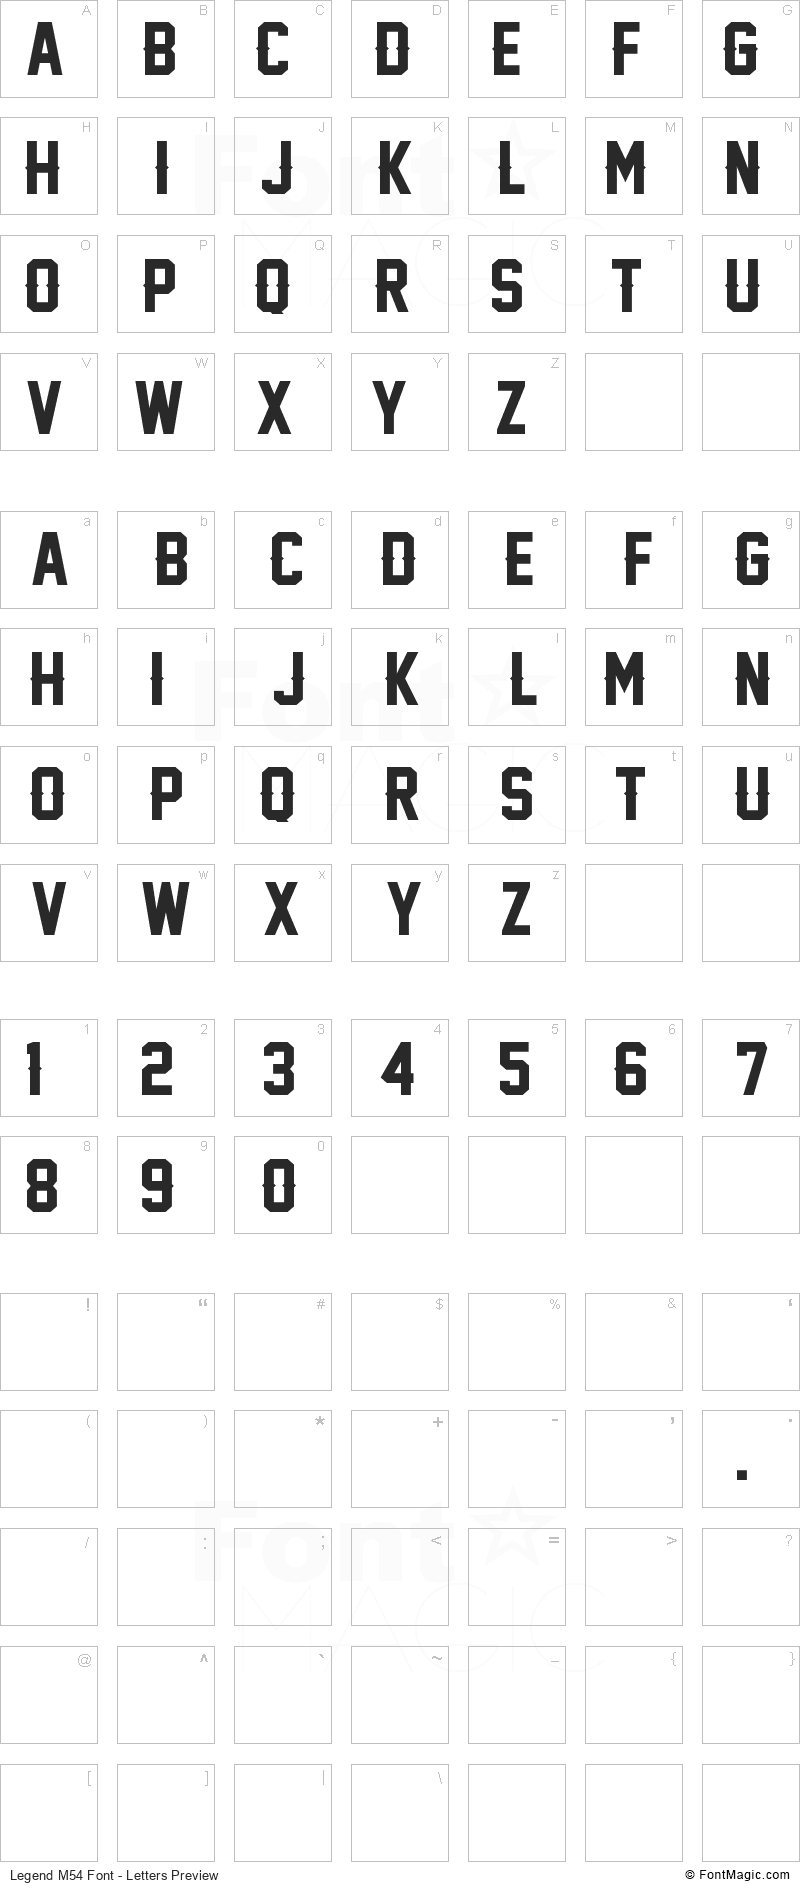 Legend M54 Font - All Latters Preview Chart